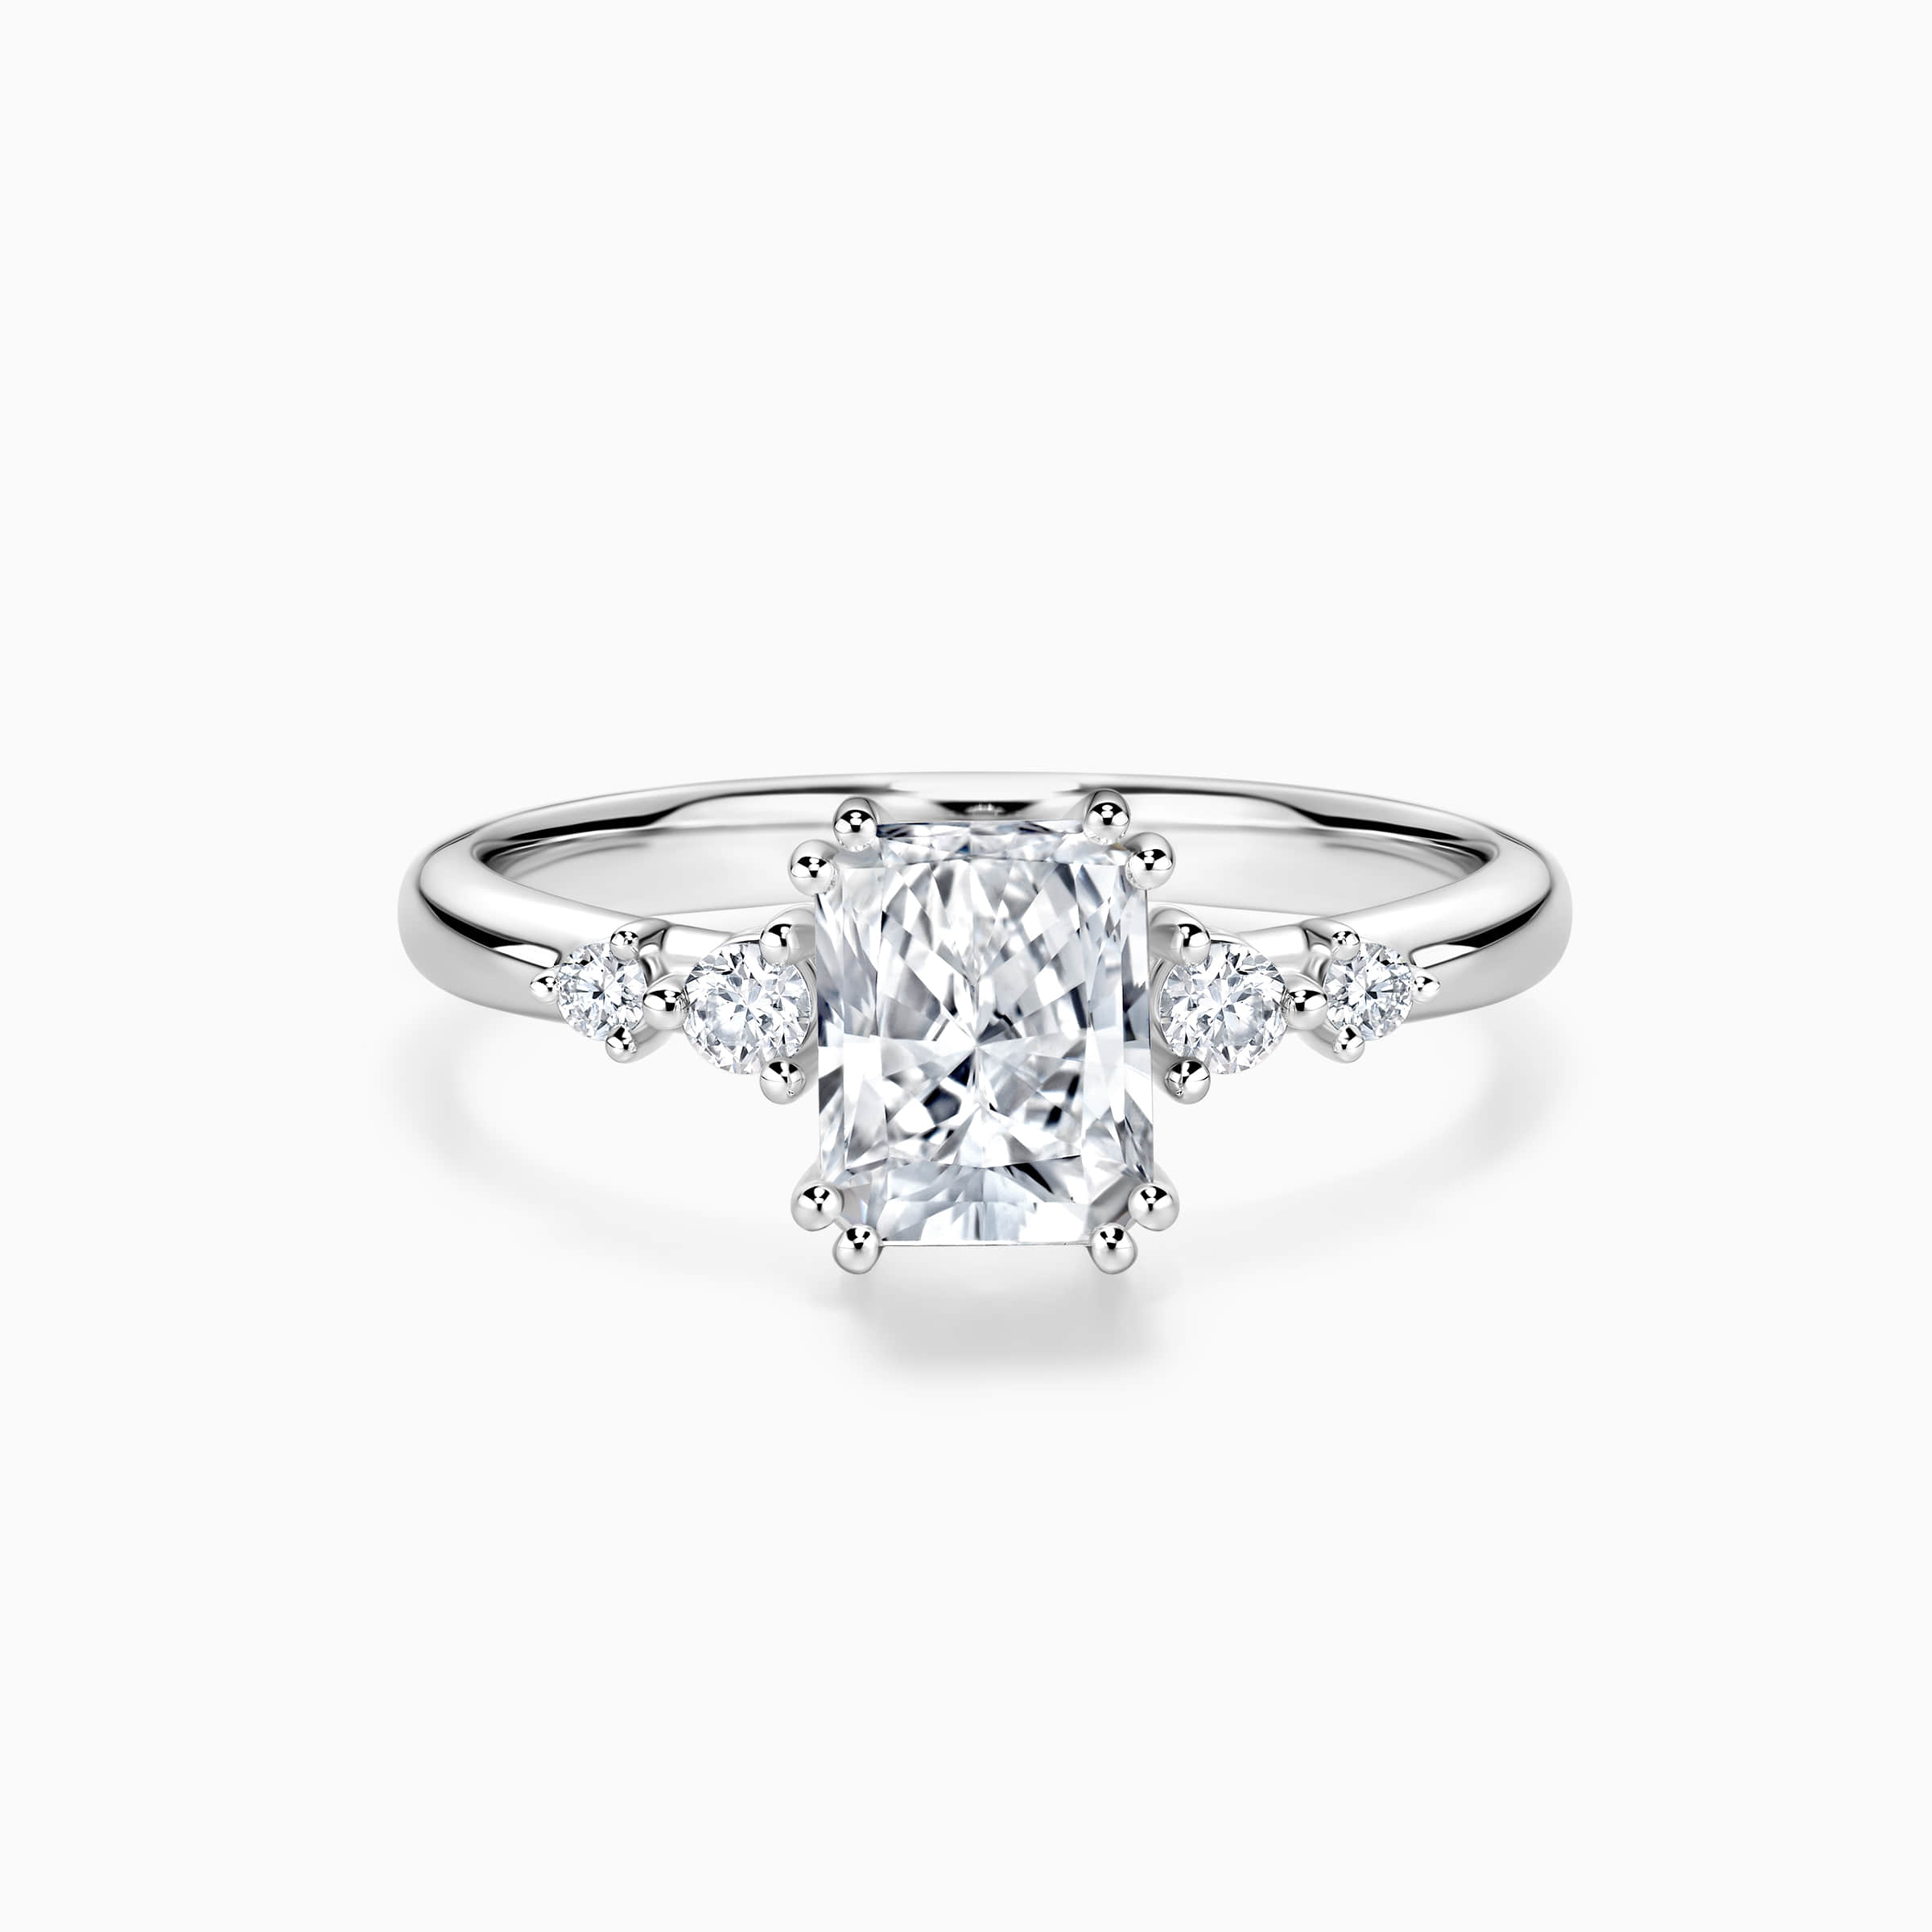 Darry Ring radiant cut engagement ring in white gold